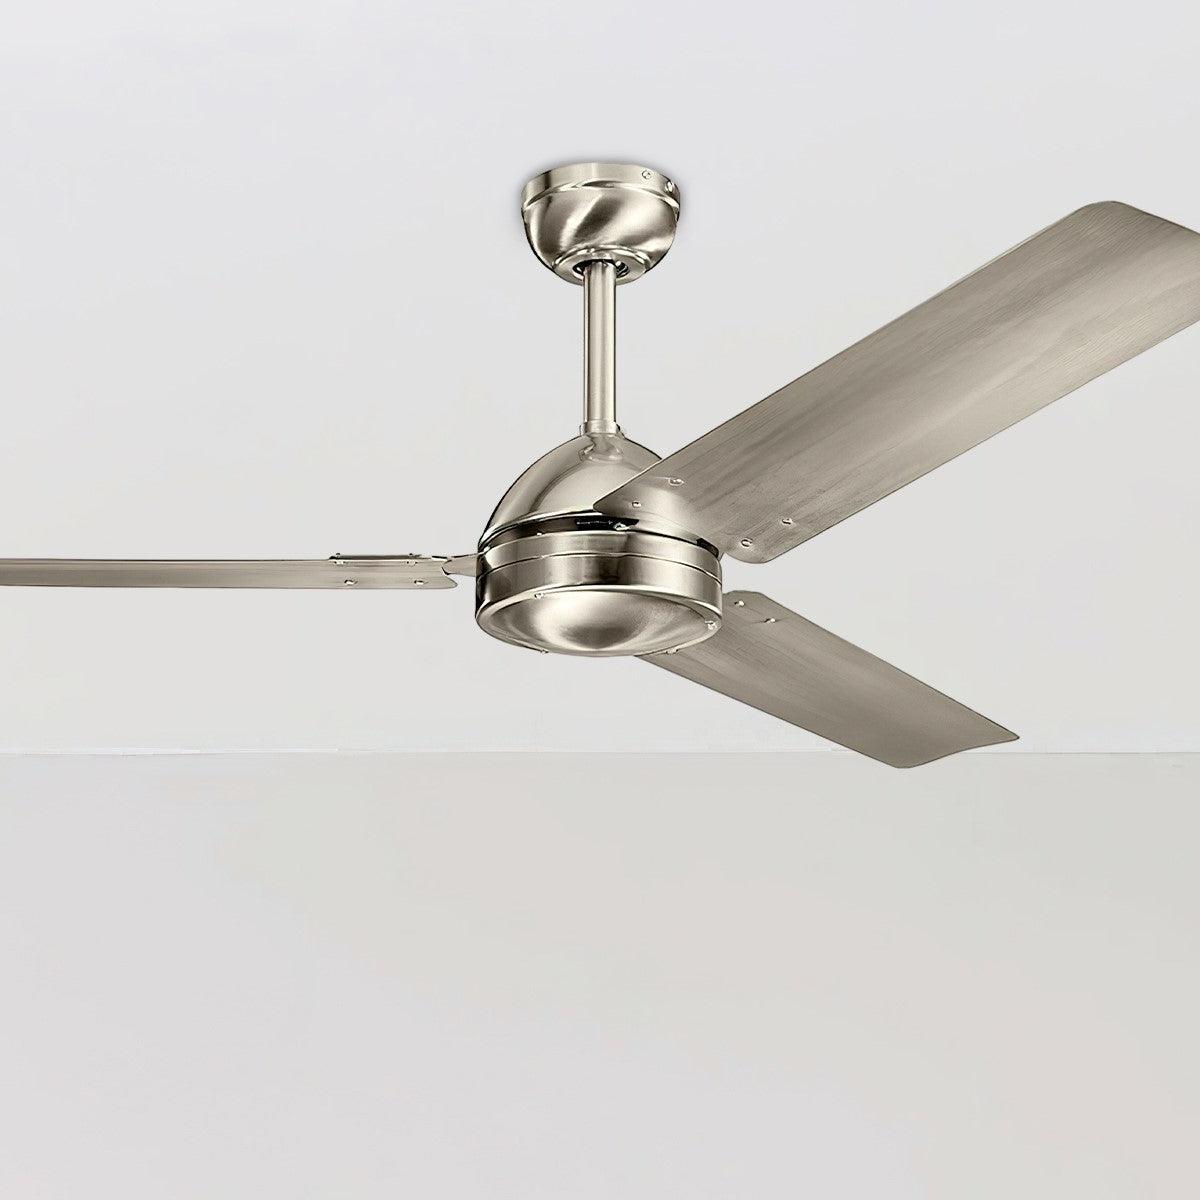 Todo 56 Inch Ceiling Fan With Wall Control - Bees Lighting